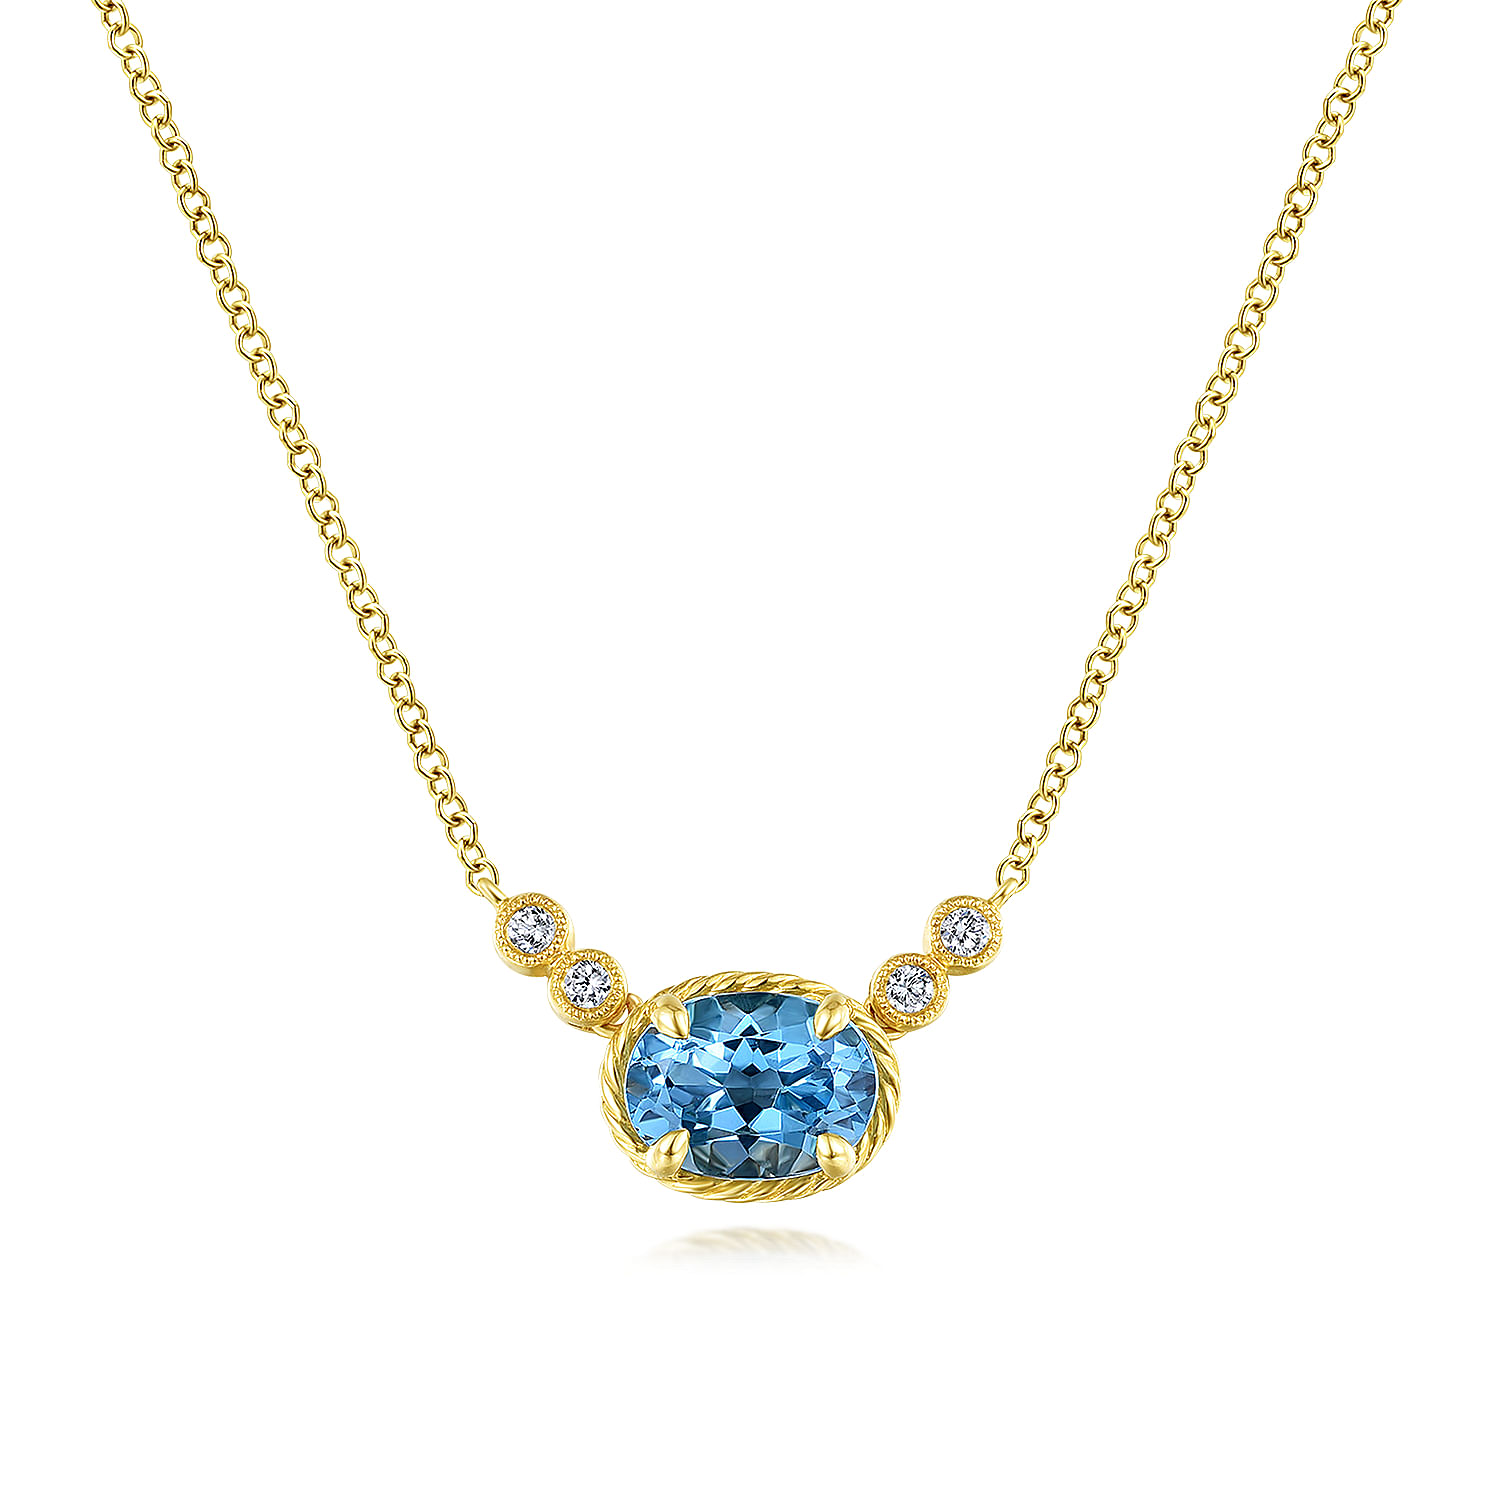 14K Yellow Gold Oval Swiss Blue Topaz Pendant Necklace with Diamond Accents